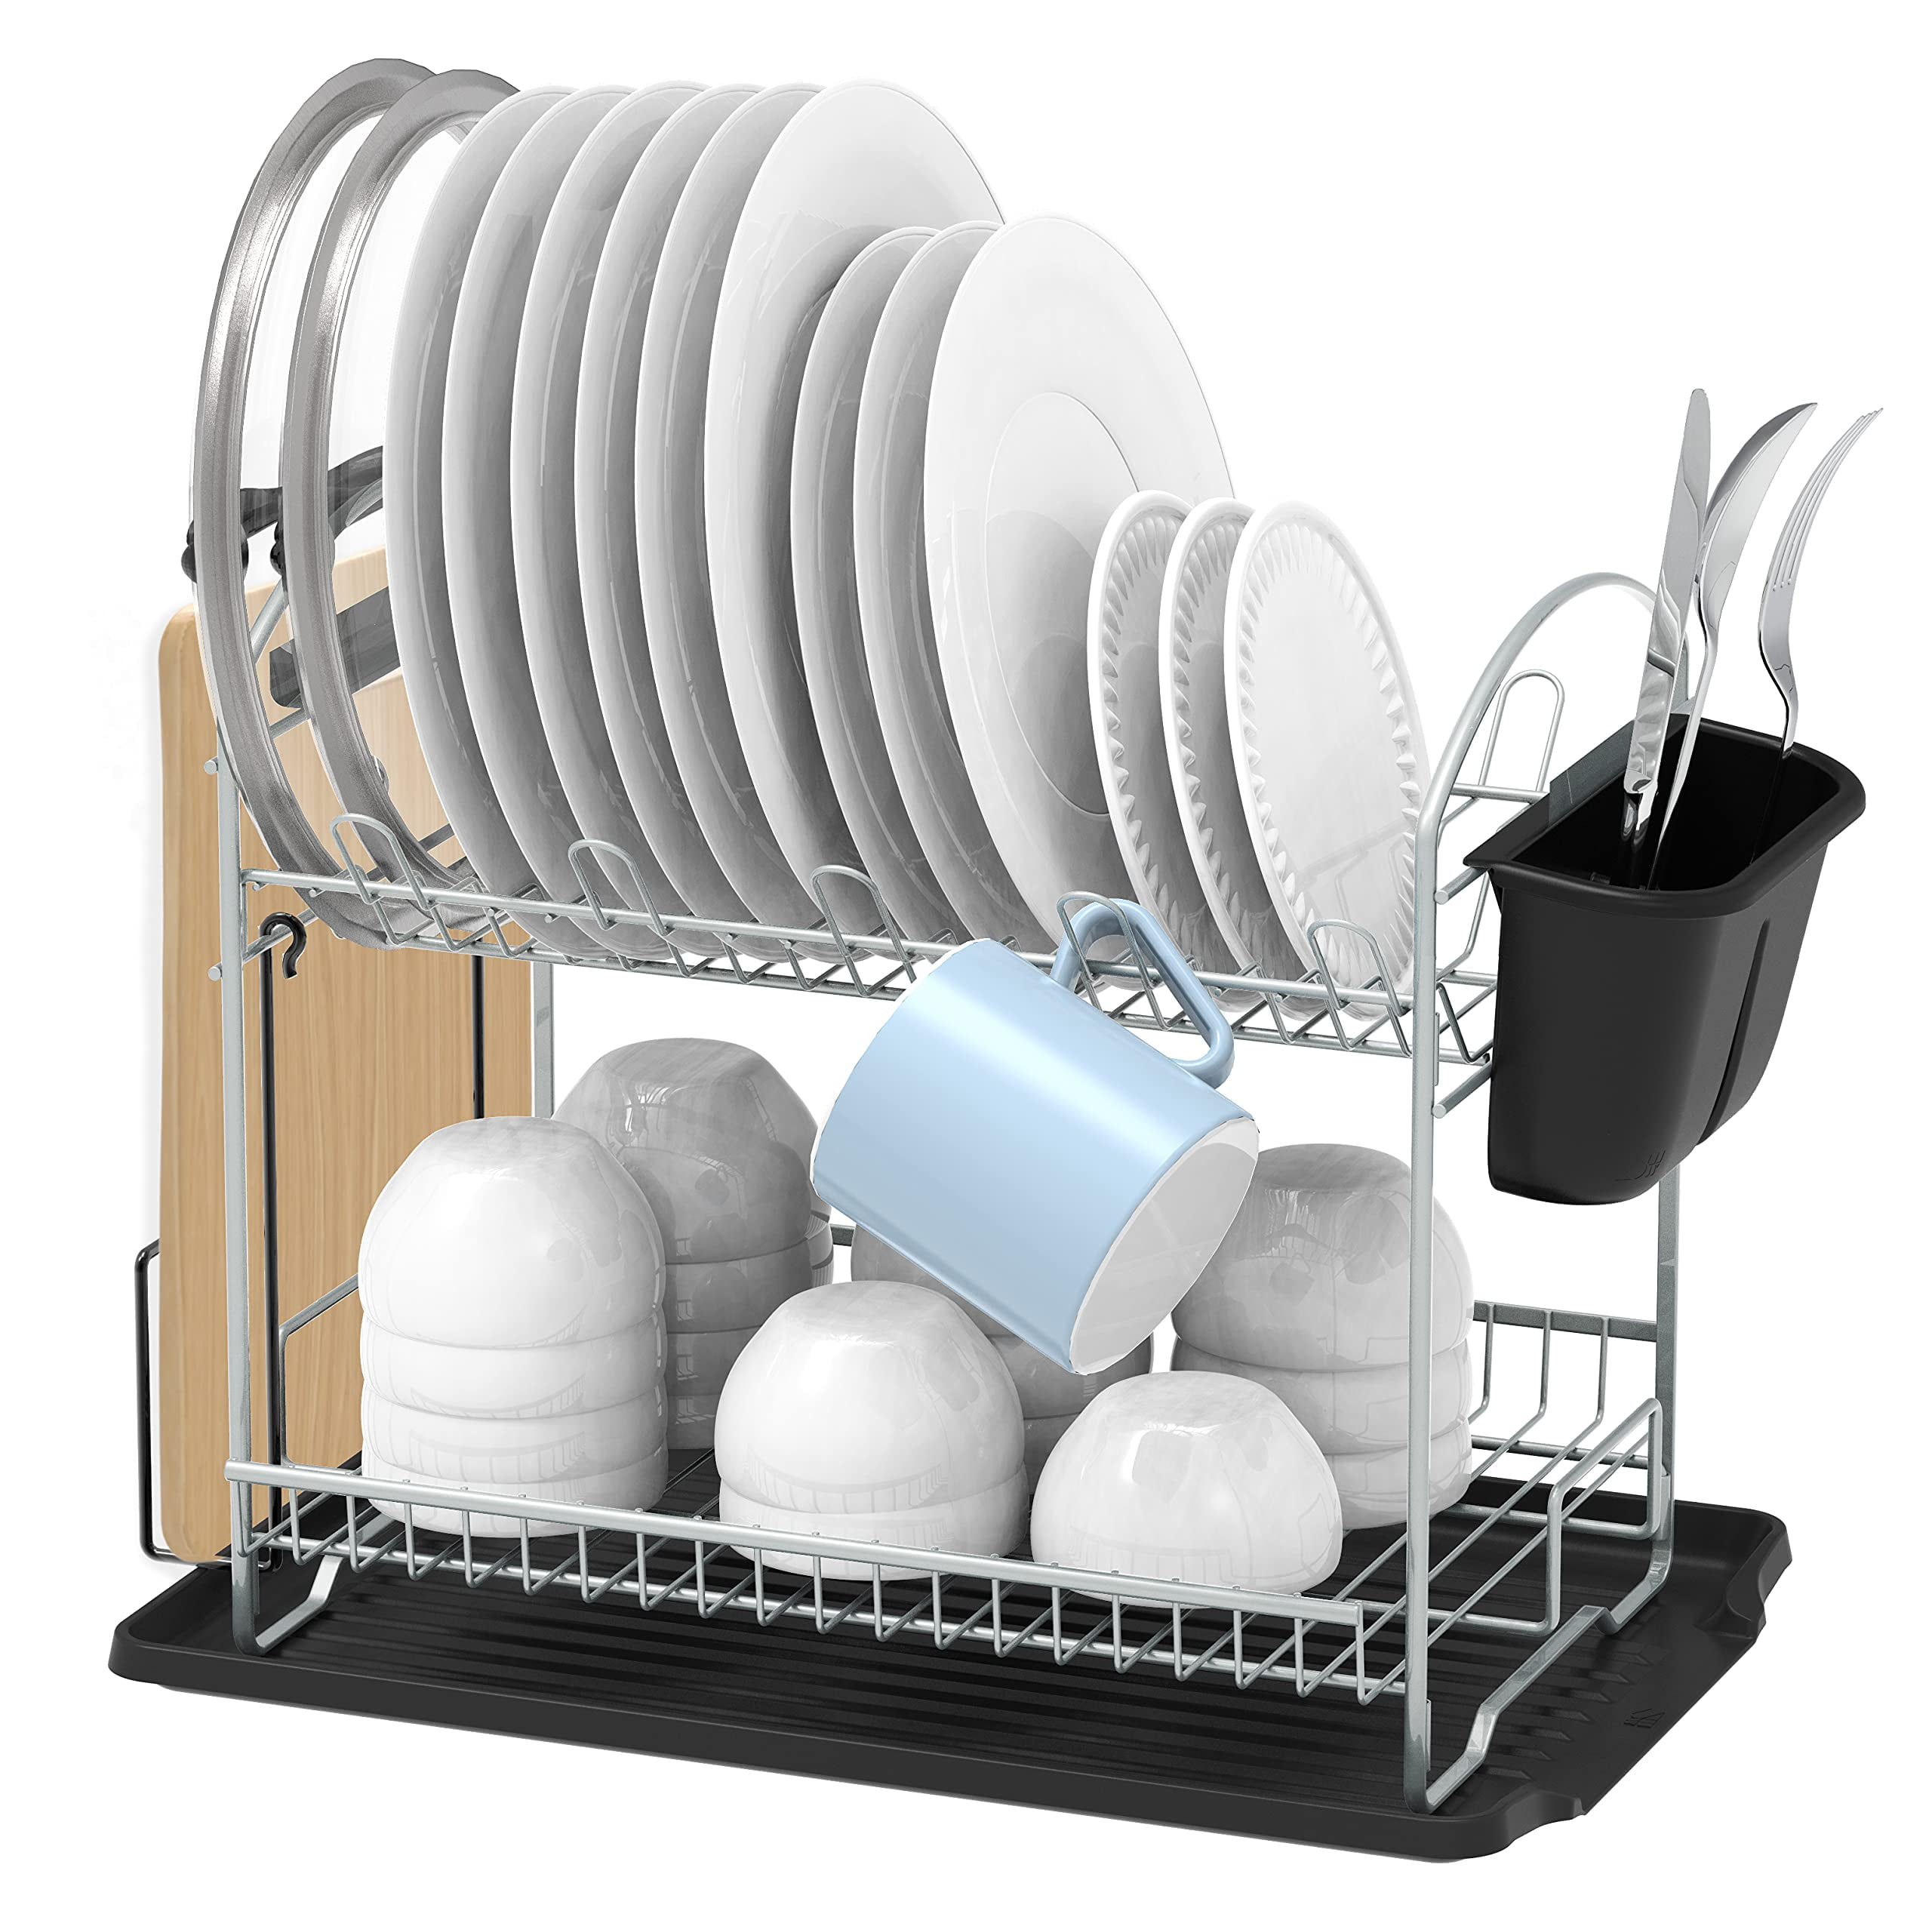 2-Tier Dish Drying Rack with Drainboard, Chrome, Simple Houseware